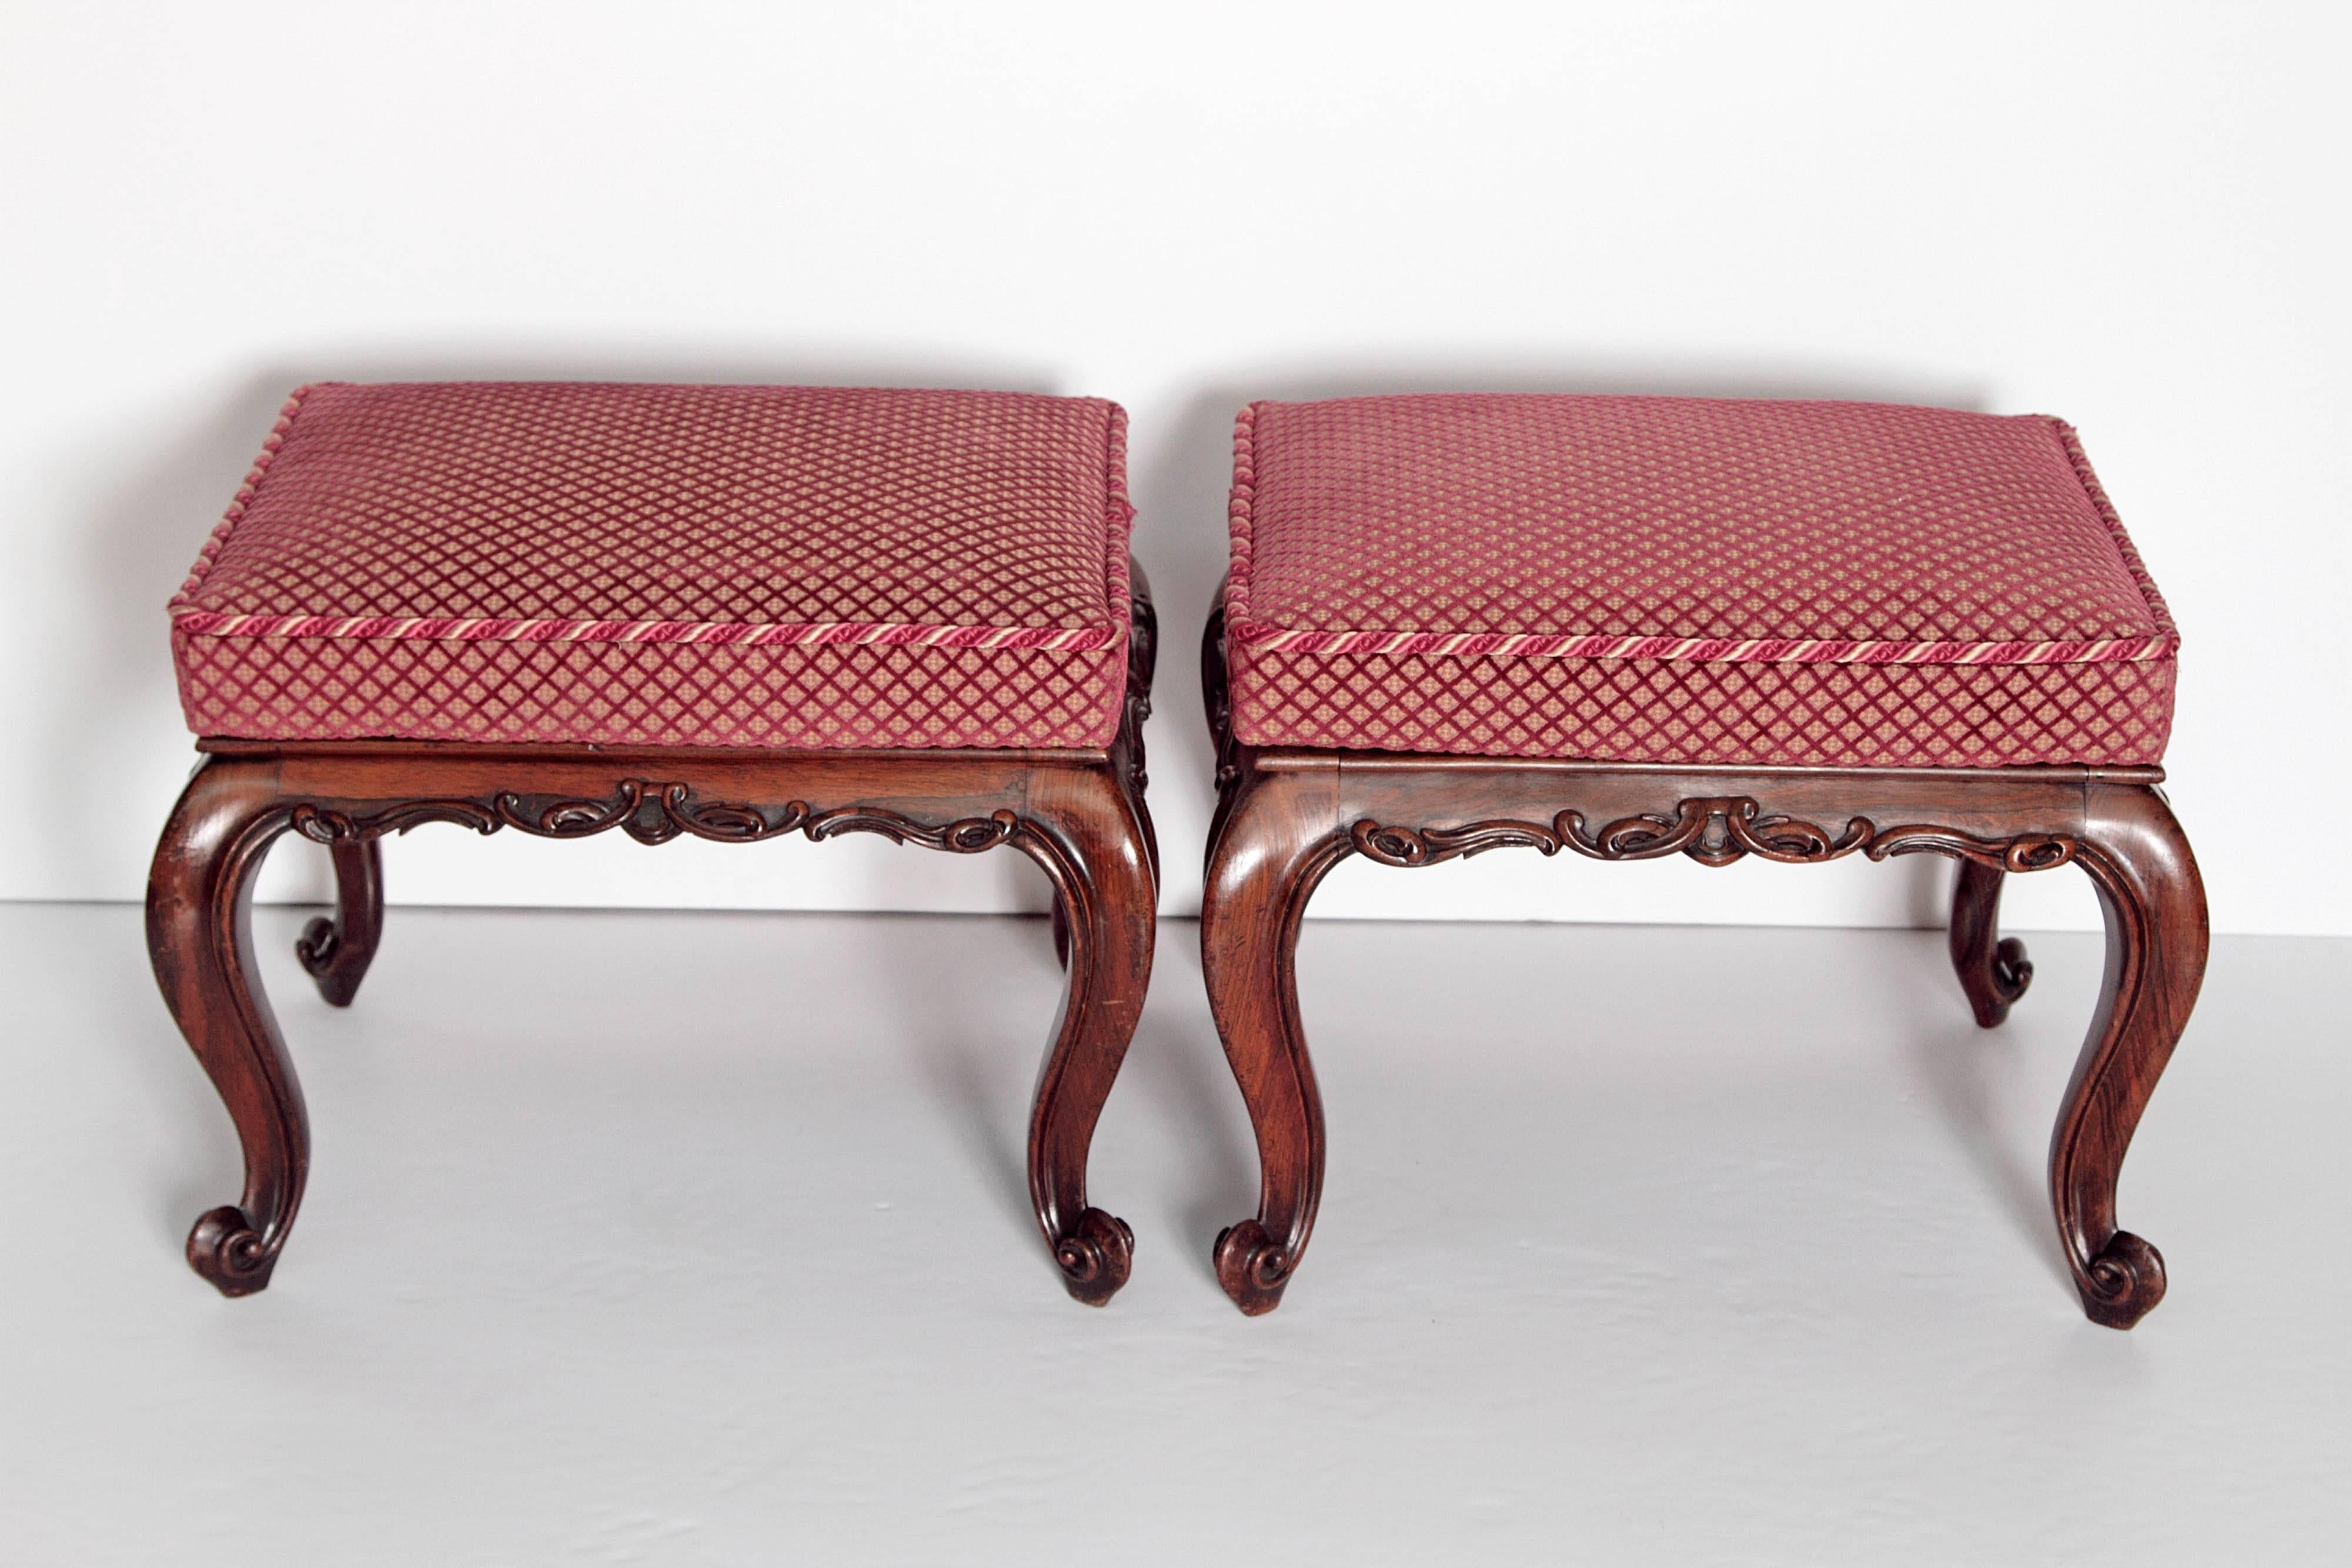 A pair of finely carved mid-Victorian rosewood stools in the Louis XV style with upholstered drop in seats.